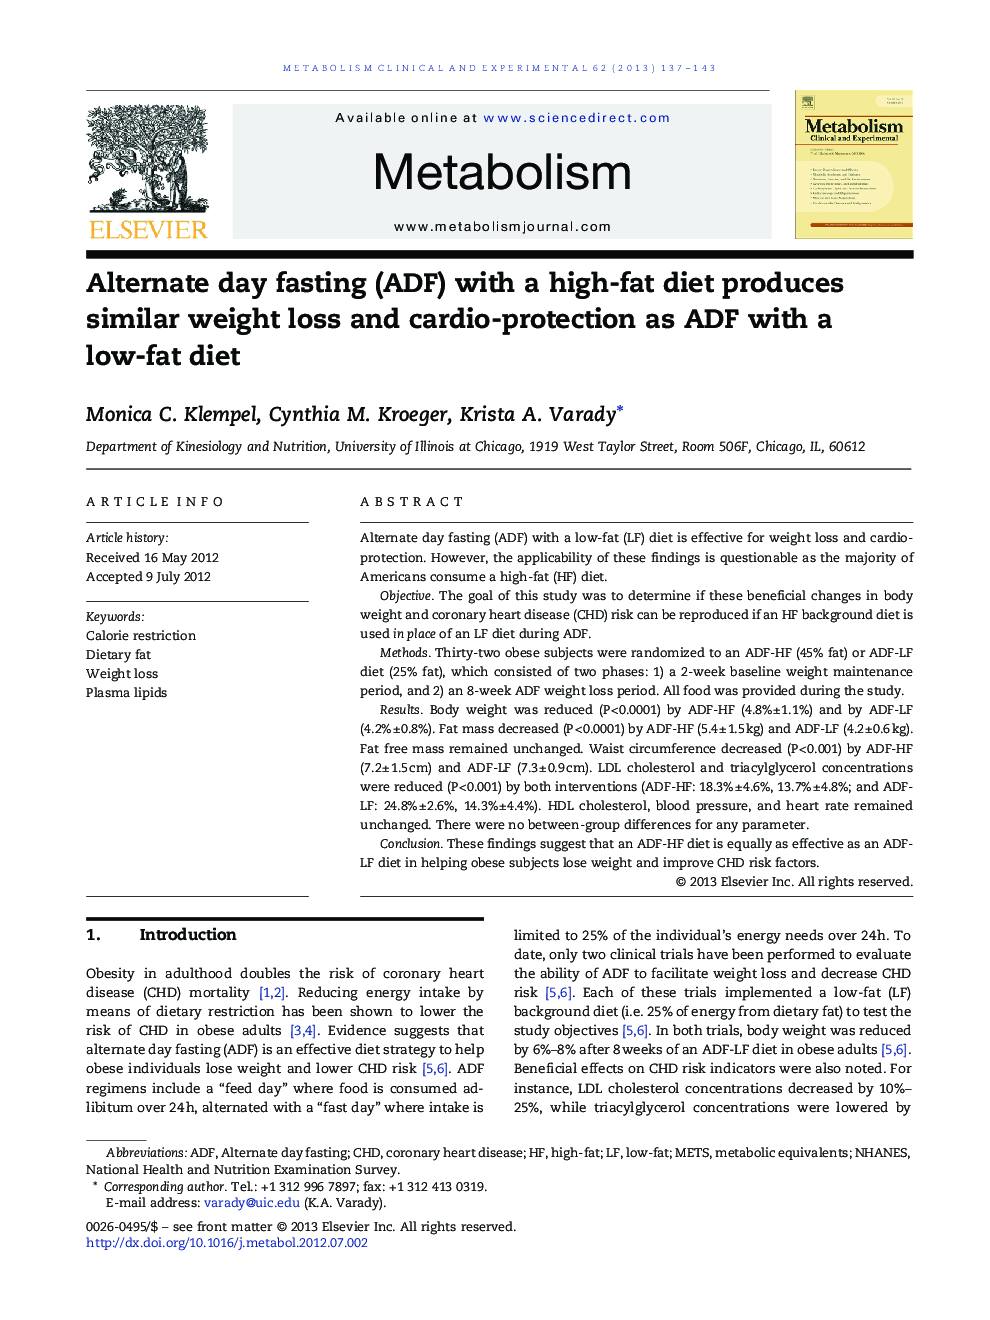 Alternate day fasting (ADF) with a high-fat diet produces similar weight loss and cardio-protection as ADF with a low-fat diet